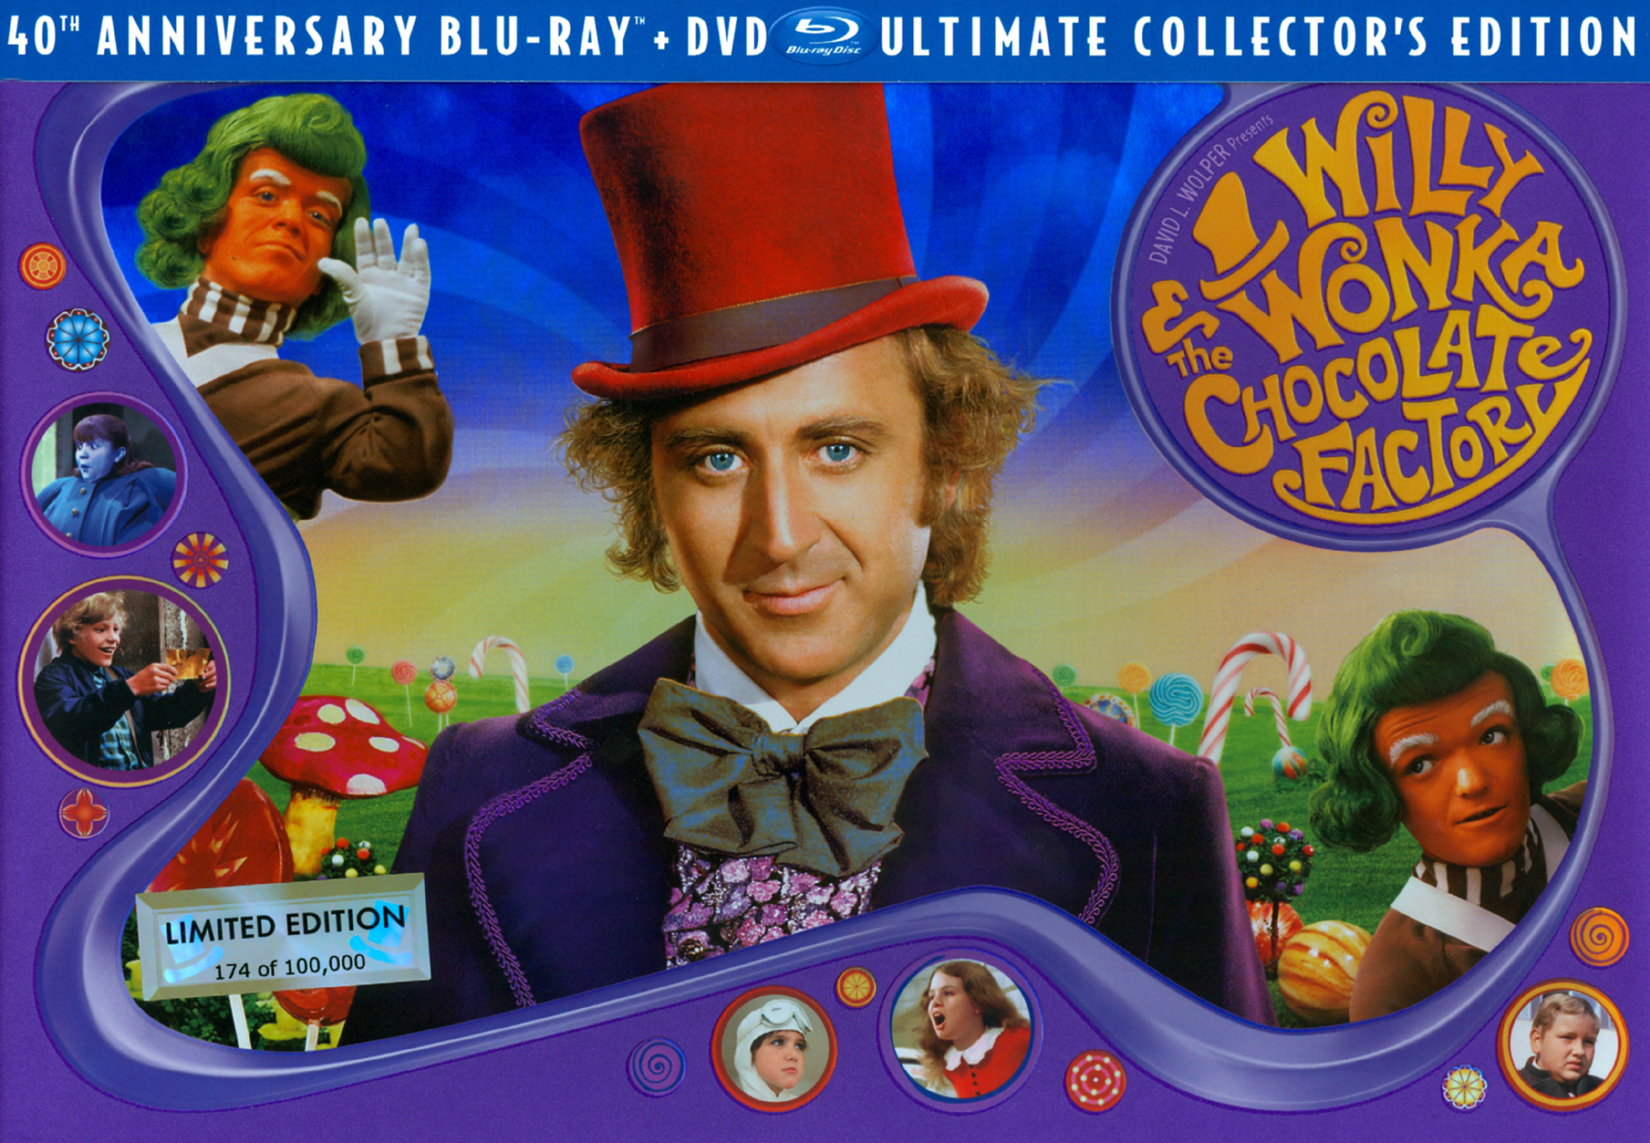 Willy Wonka & the Chocolate Factory (Three-Disc 40th Anniversary  Collector's Edition Blu-ray/DVD Combo)